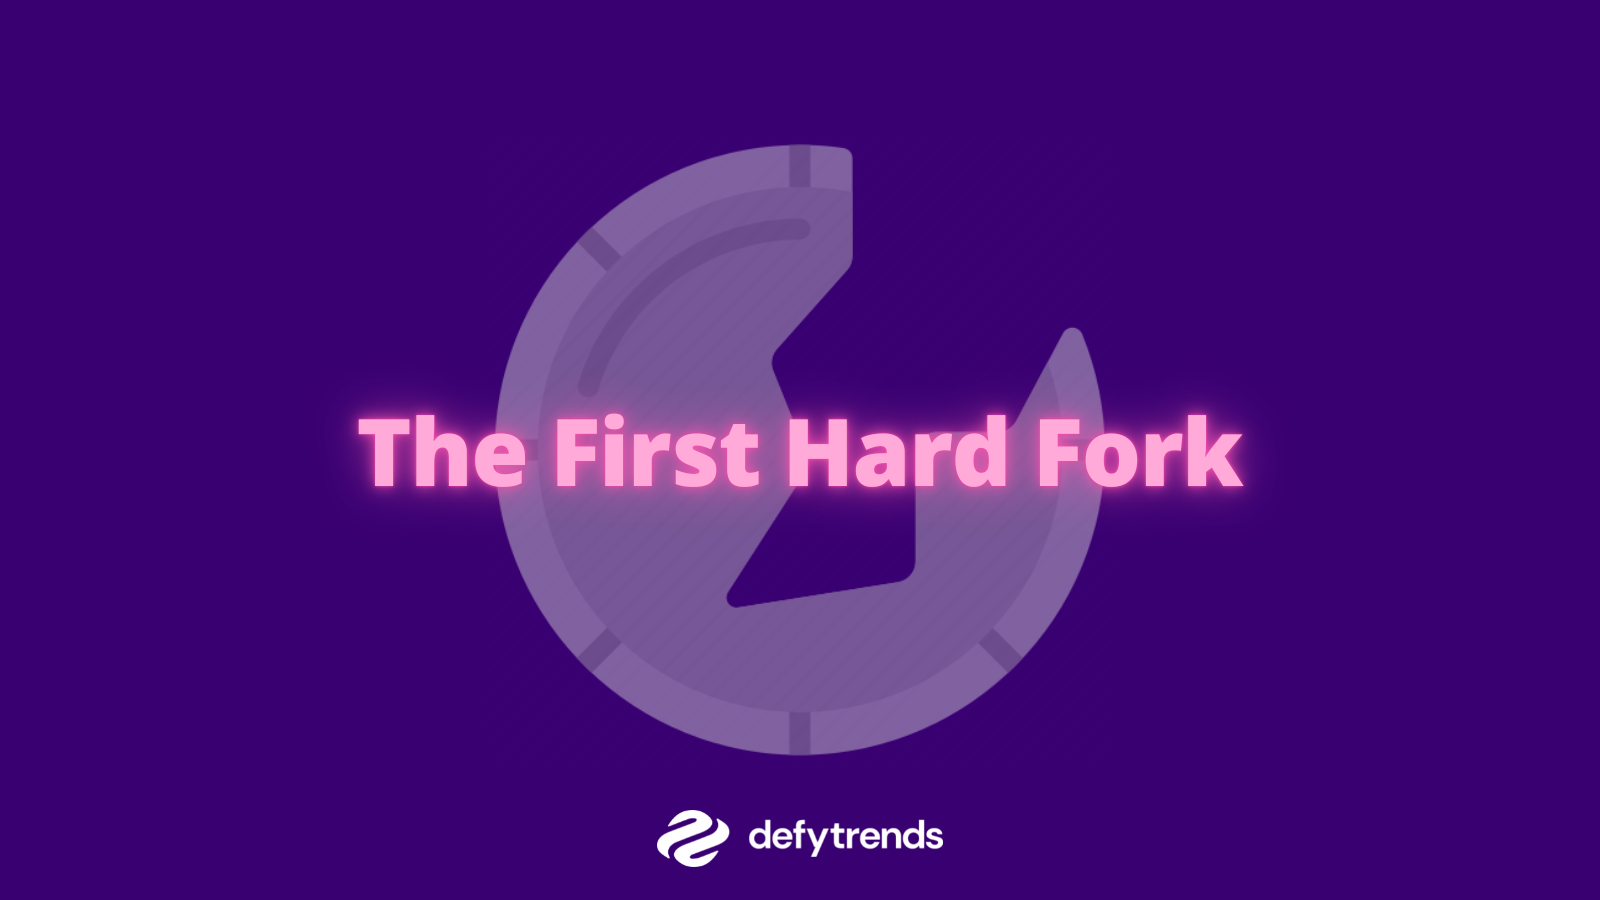 The First Hard Fork